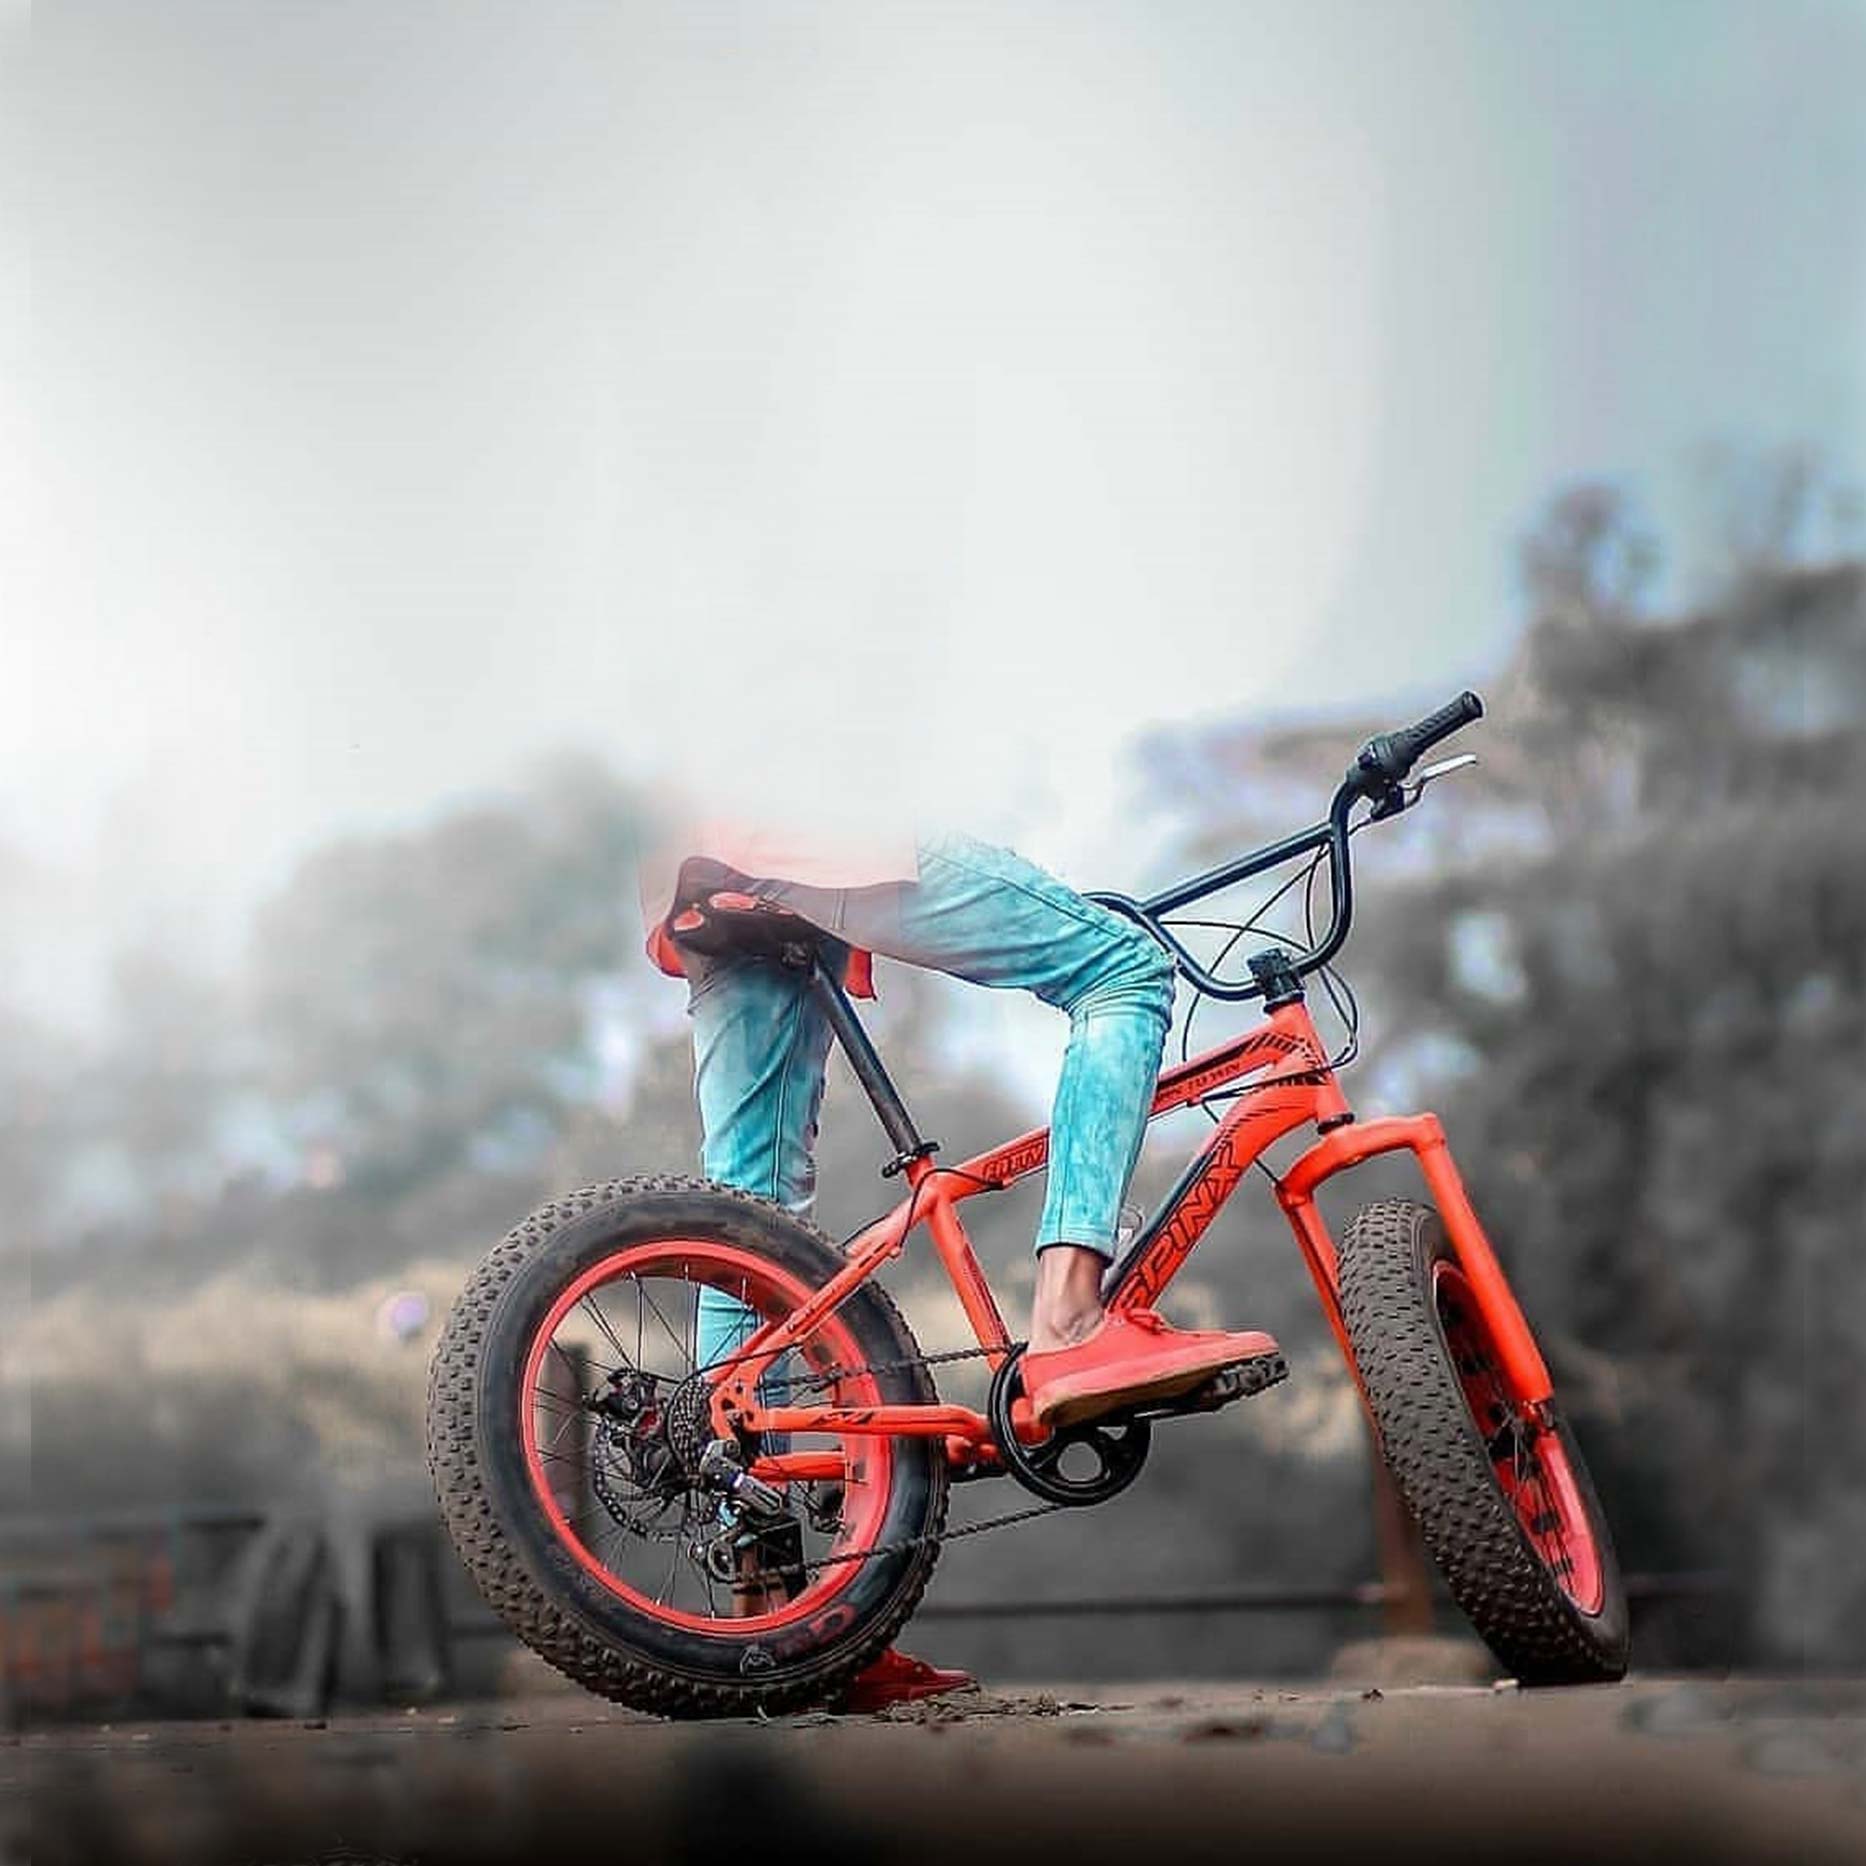 Blur Cycle Lightroom Background Free Stock Image